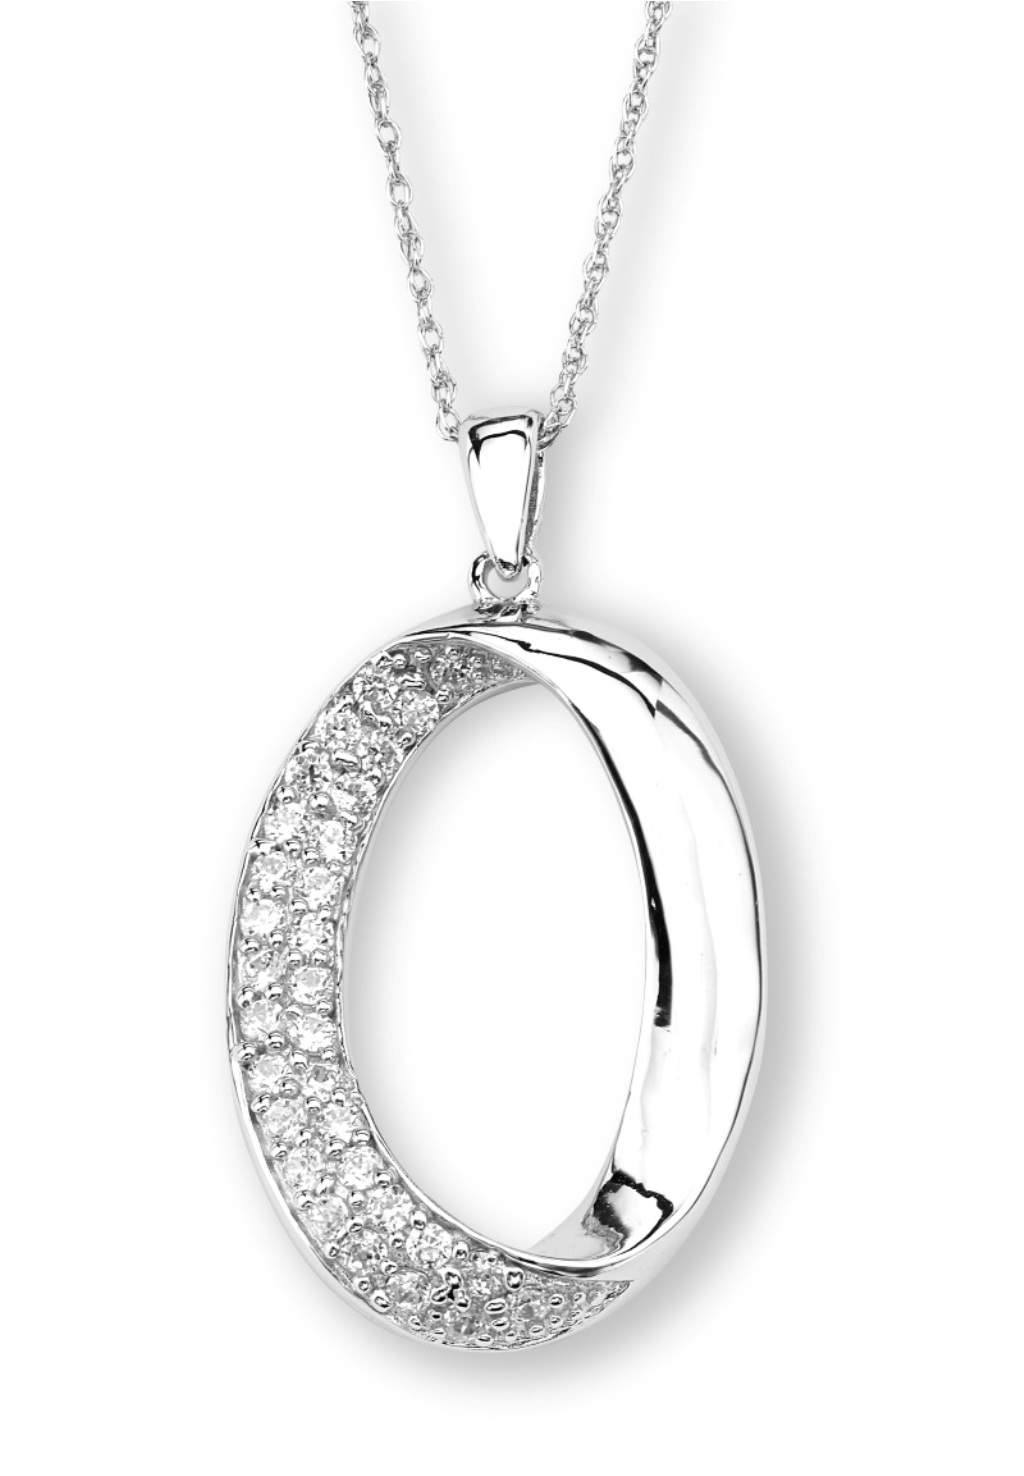 Beveled Edging CZ Circle Pendant Necklace, Rhodium Plated Sterling Silver, 18